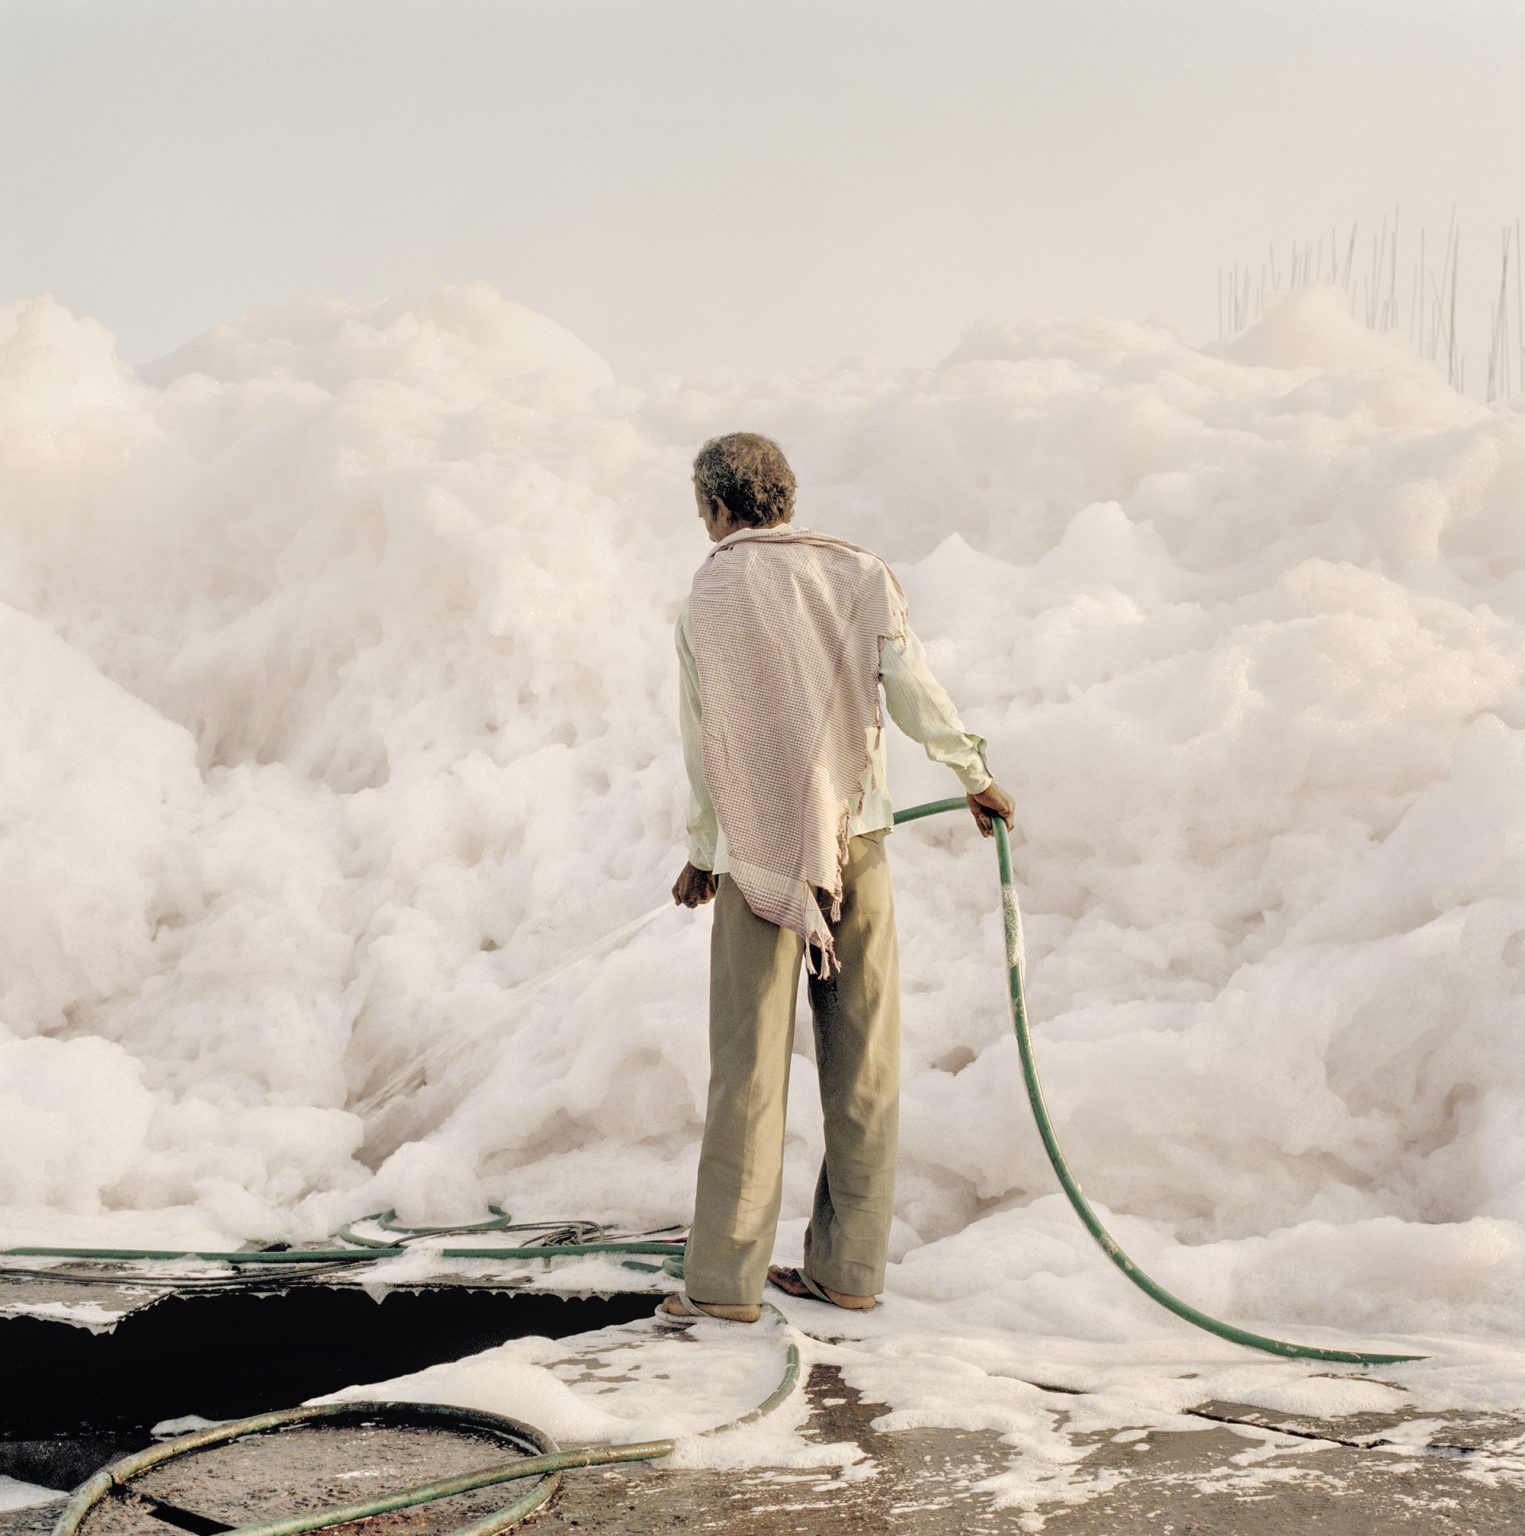 A worker with a water hose tries to tame an iceberg of foam form chemical waste dumped by factories along the Yamuna river.